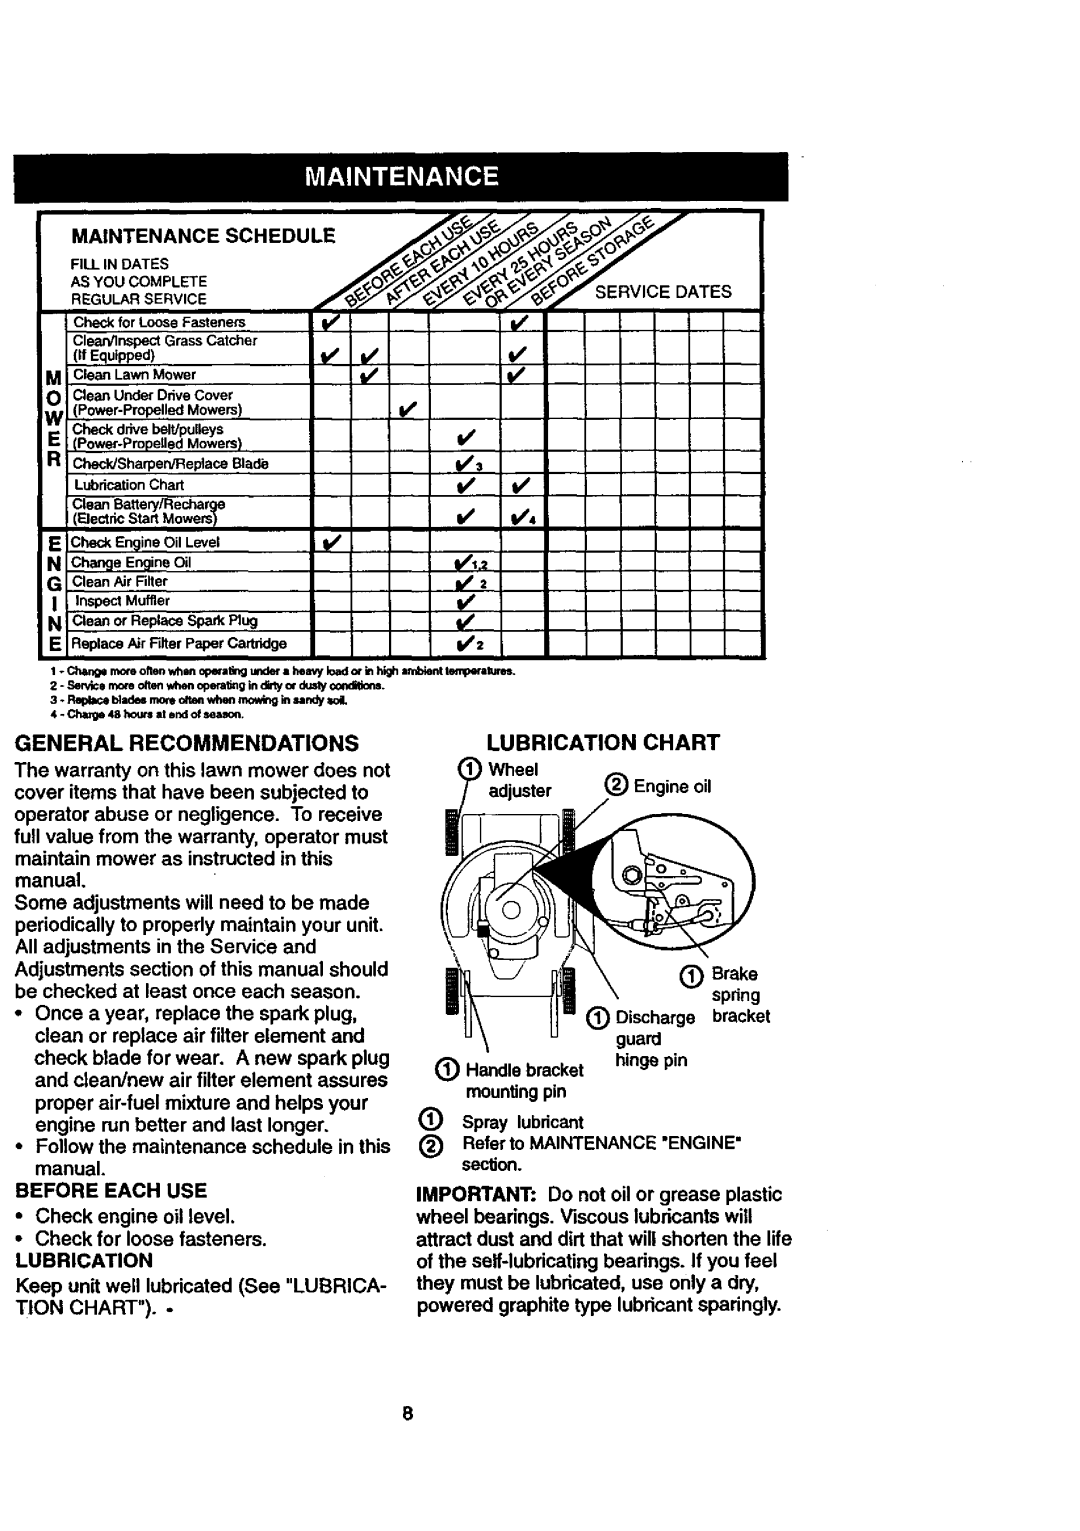 Craftsman 917.387205 owner manual General Recommendations, Viced-Ates, Before Each USE, Lubrication, Tion Chart 